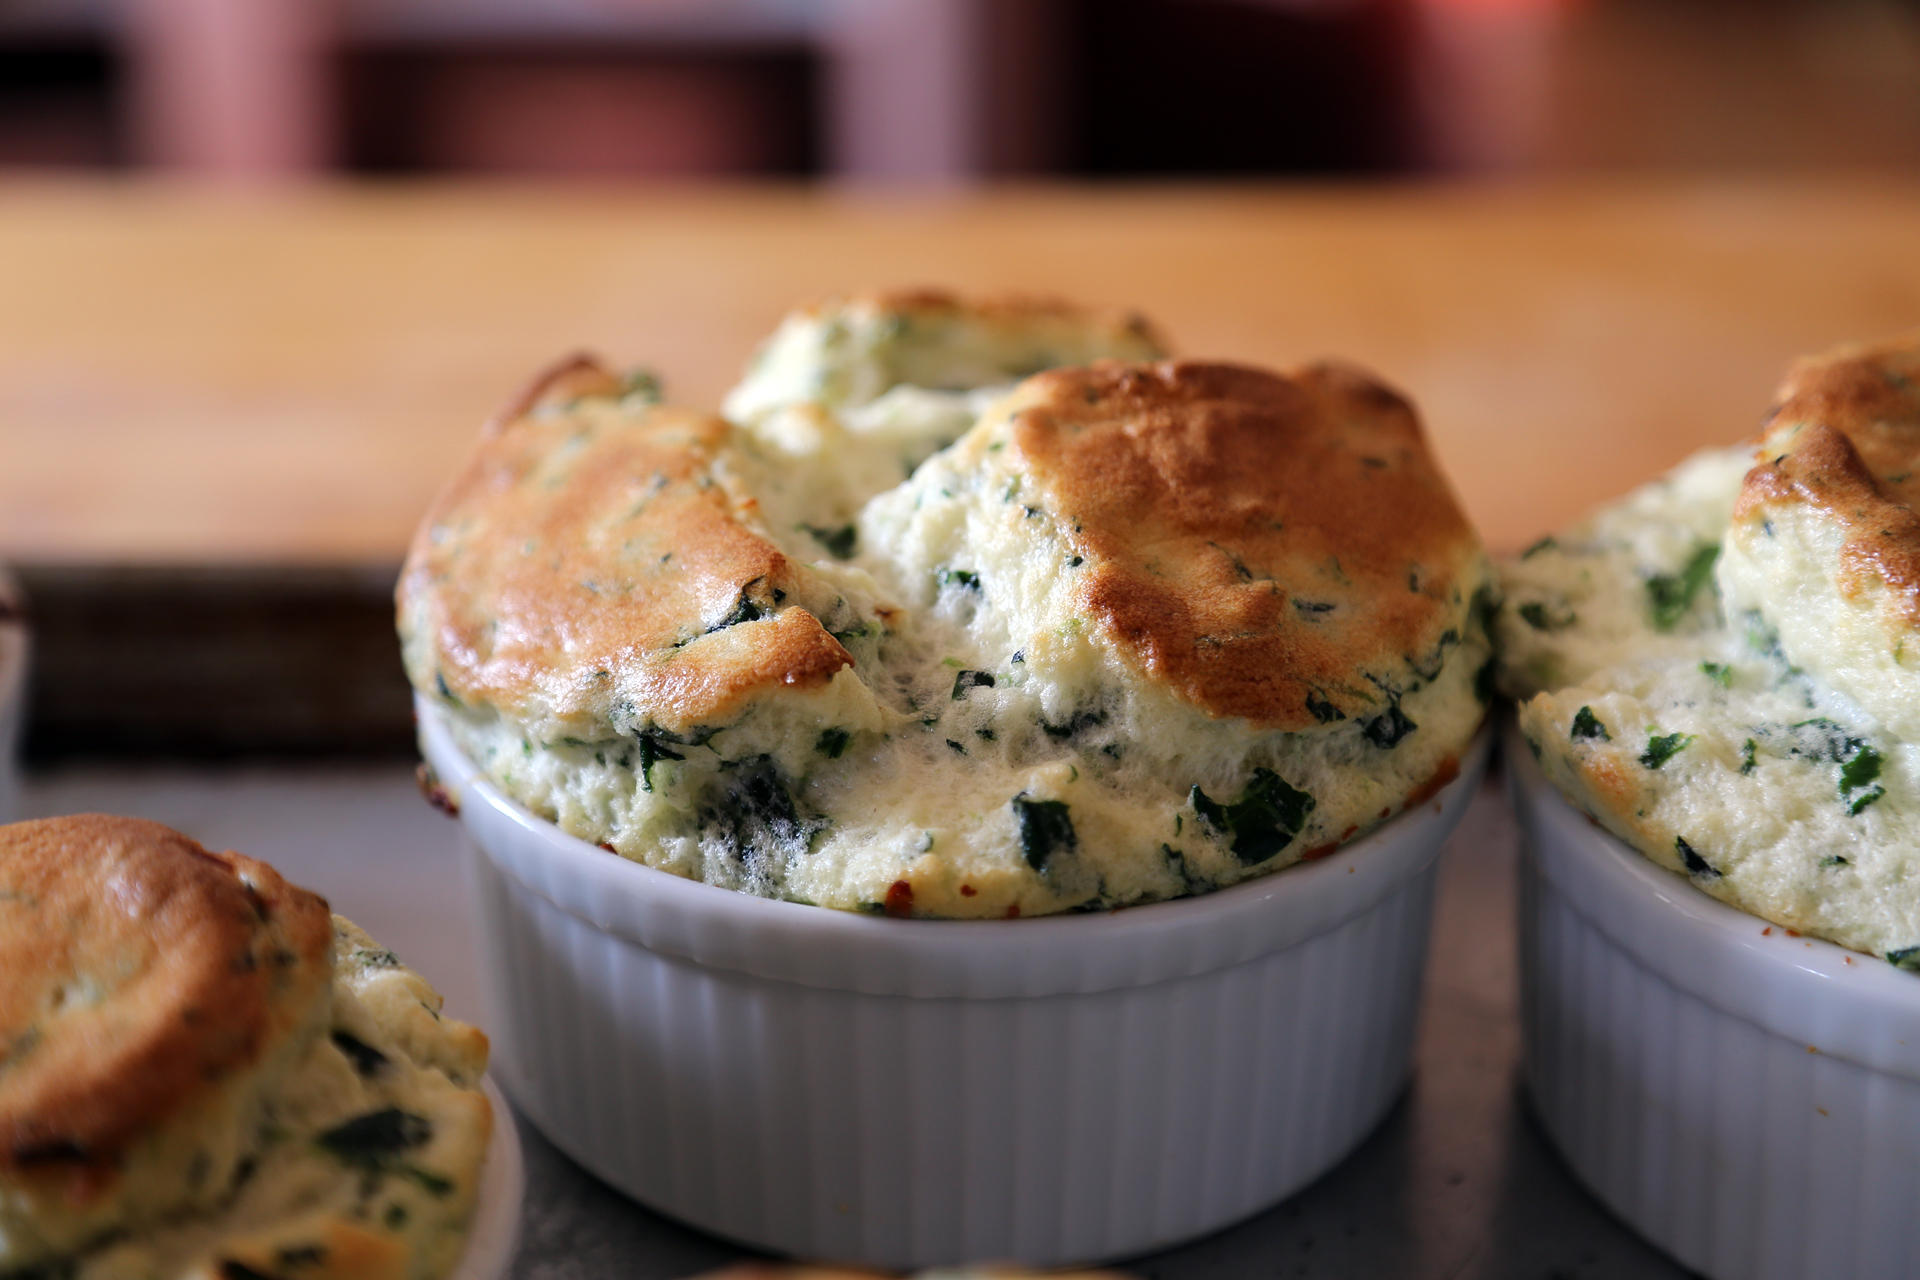  Serve the Spinach and Gruyere Soufflés immediately.